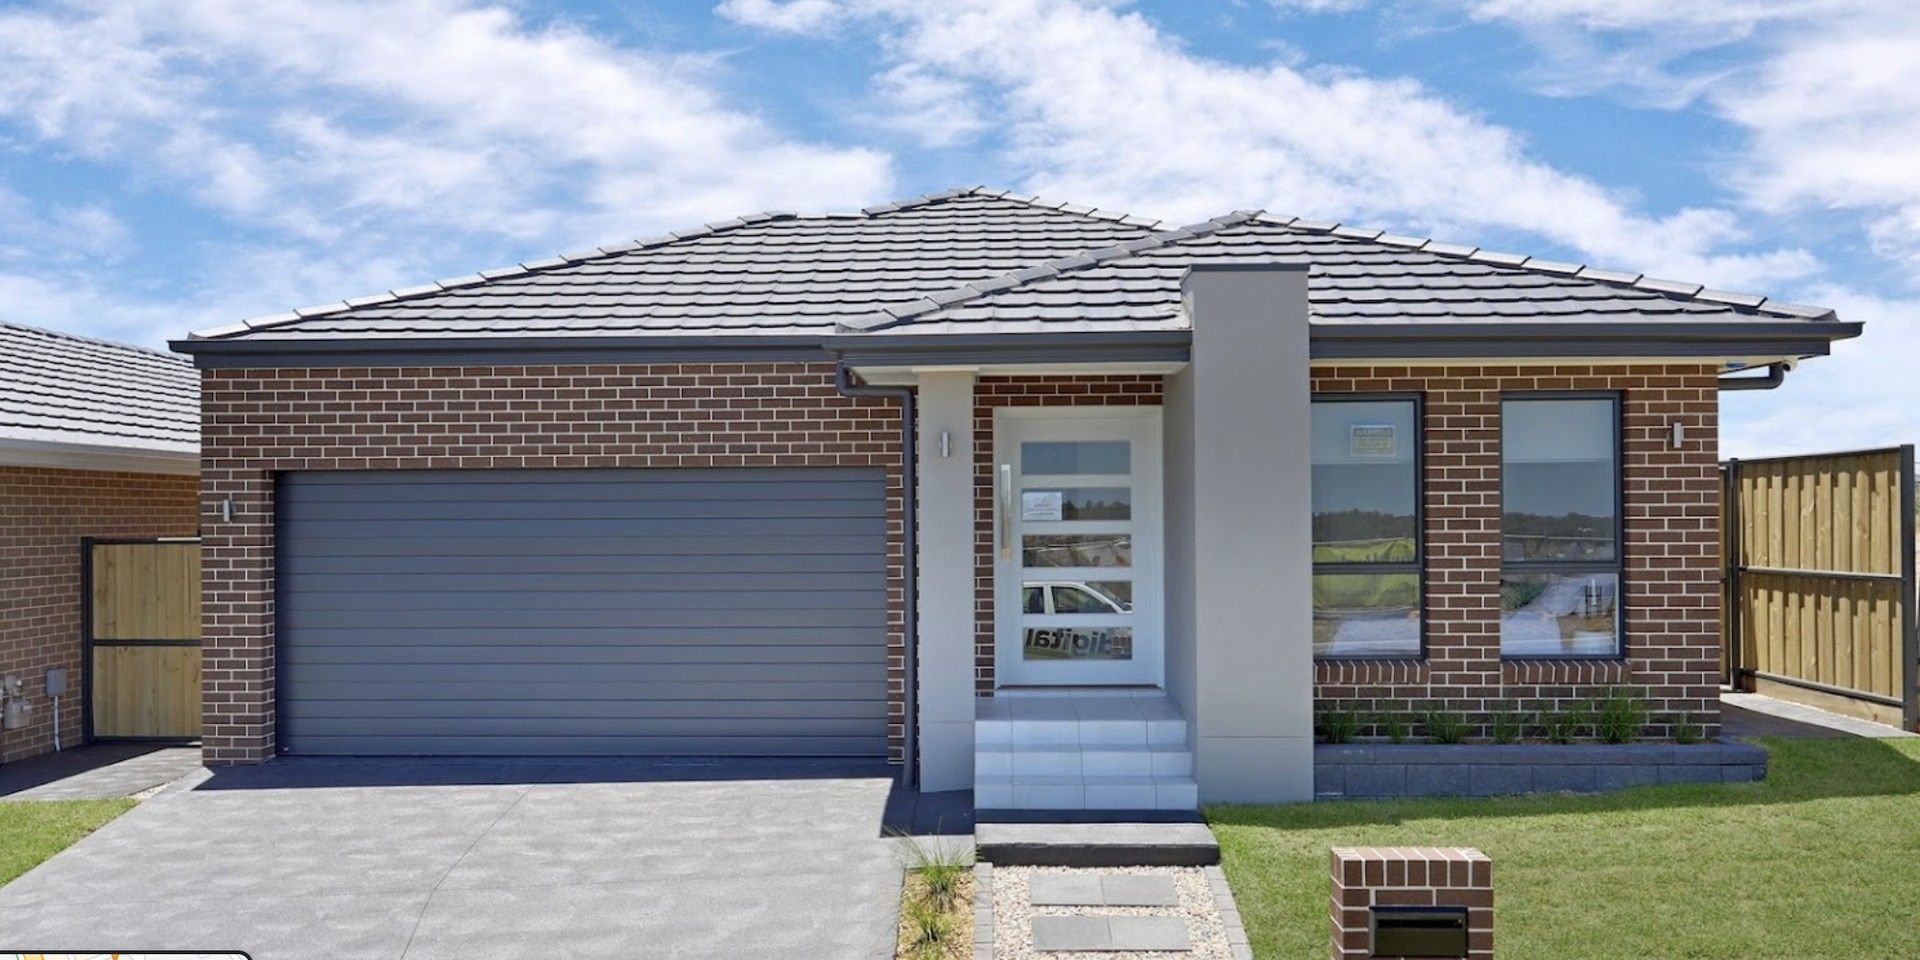 4 bedrooms New House & Land in TBA Box Hill BOX HILL NSW, 2765